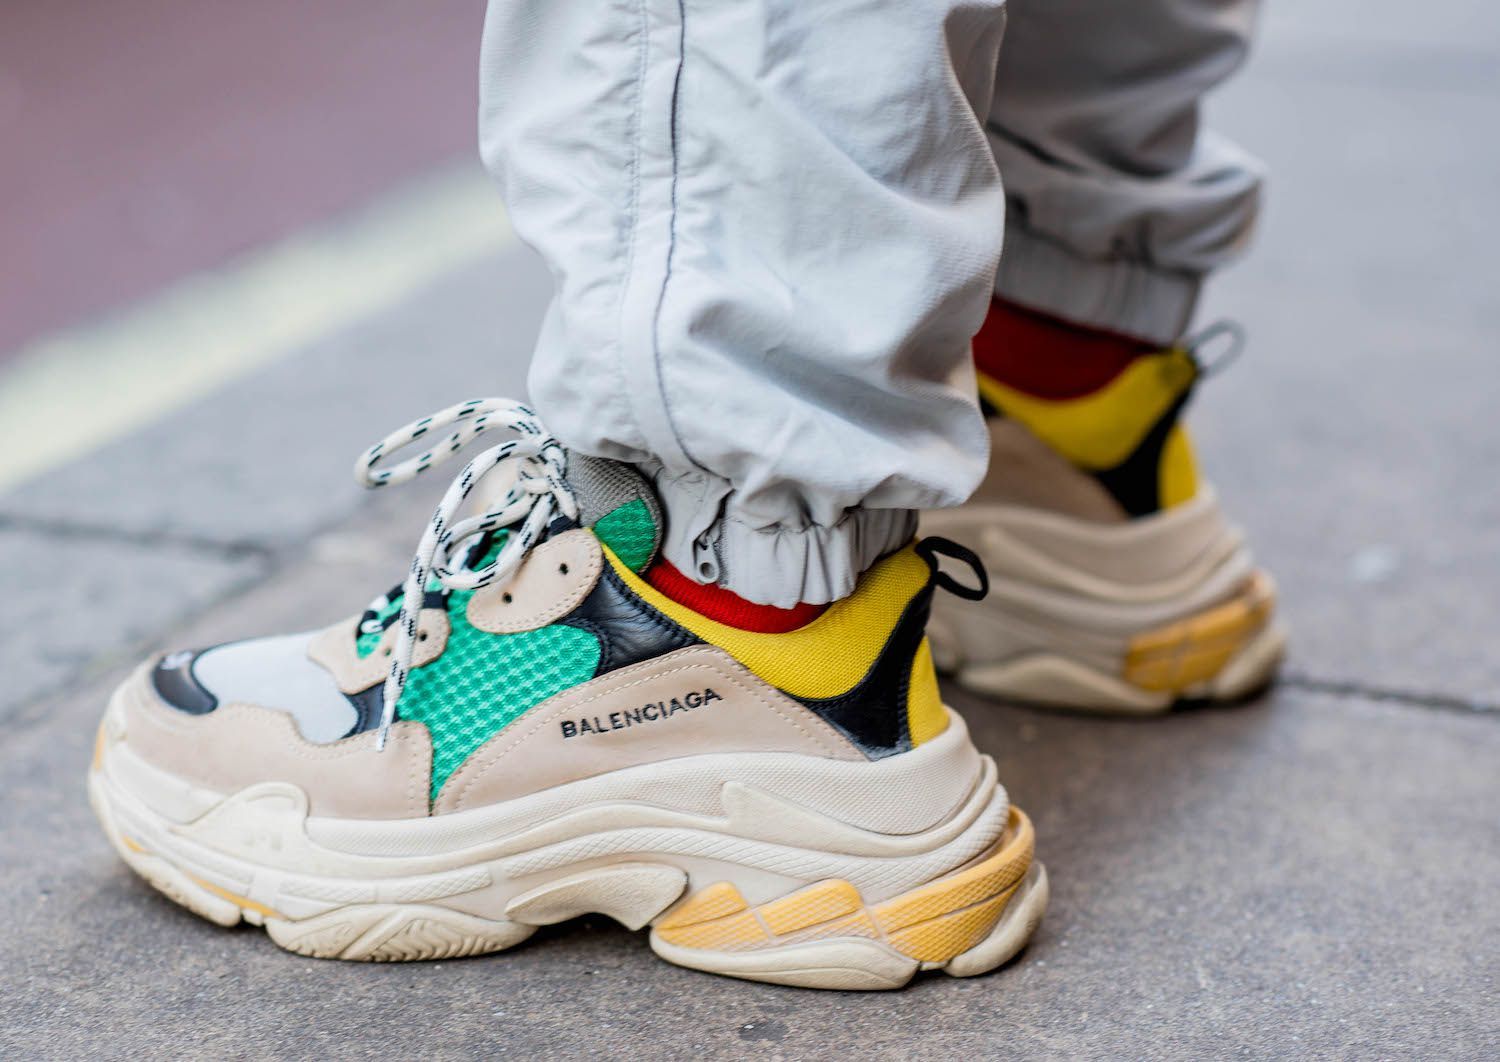 Balenciaga launches 6 new TripleS colorways